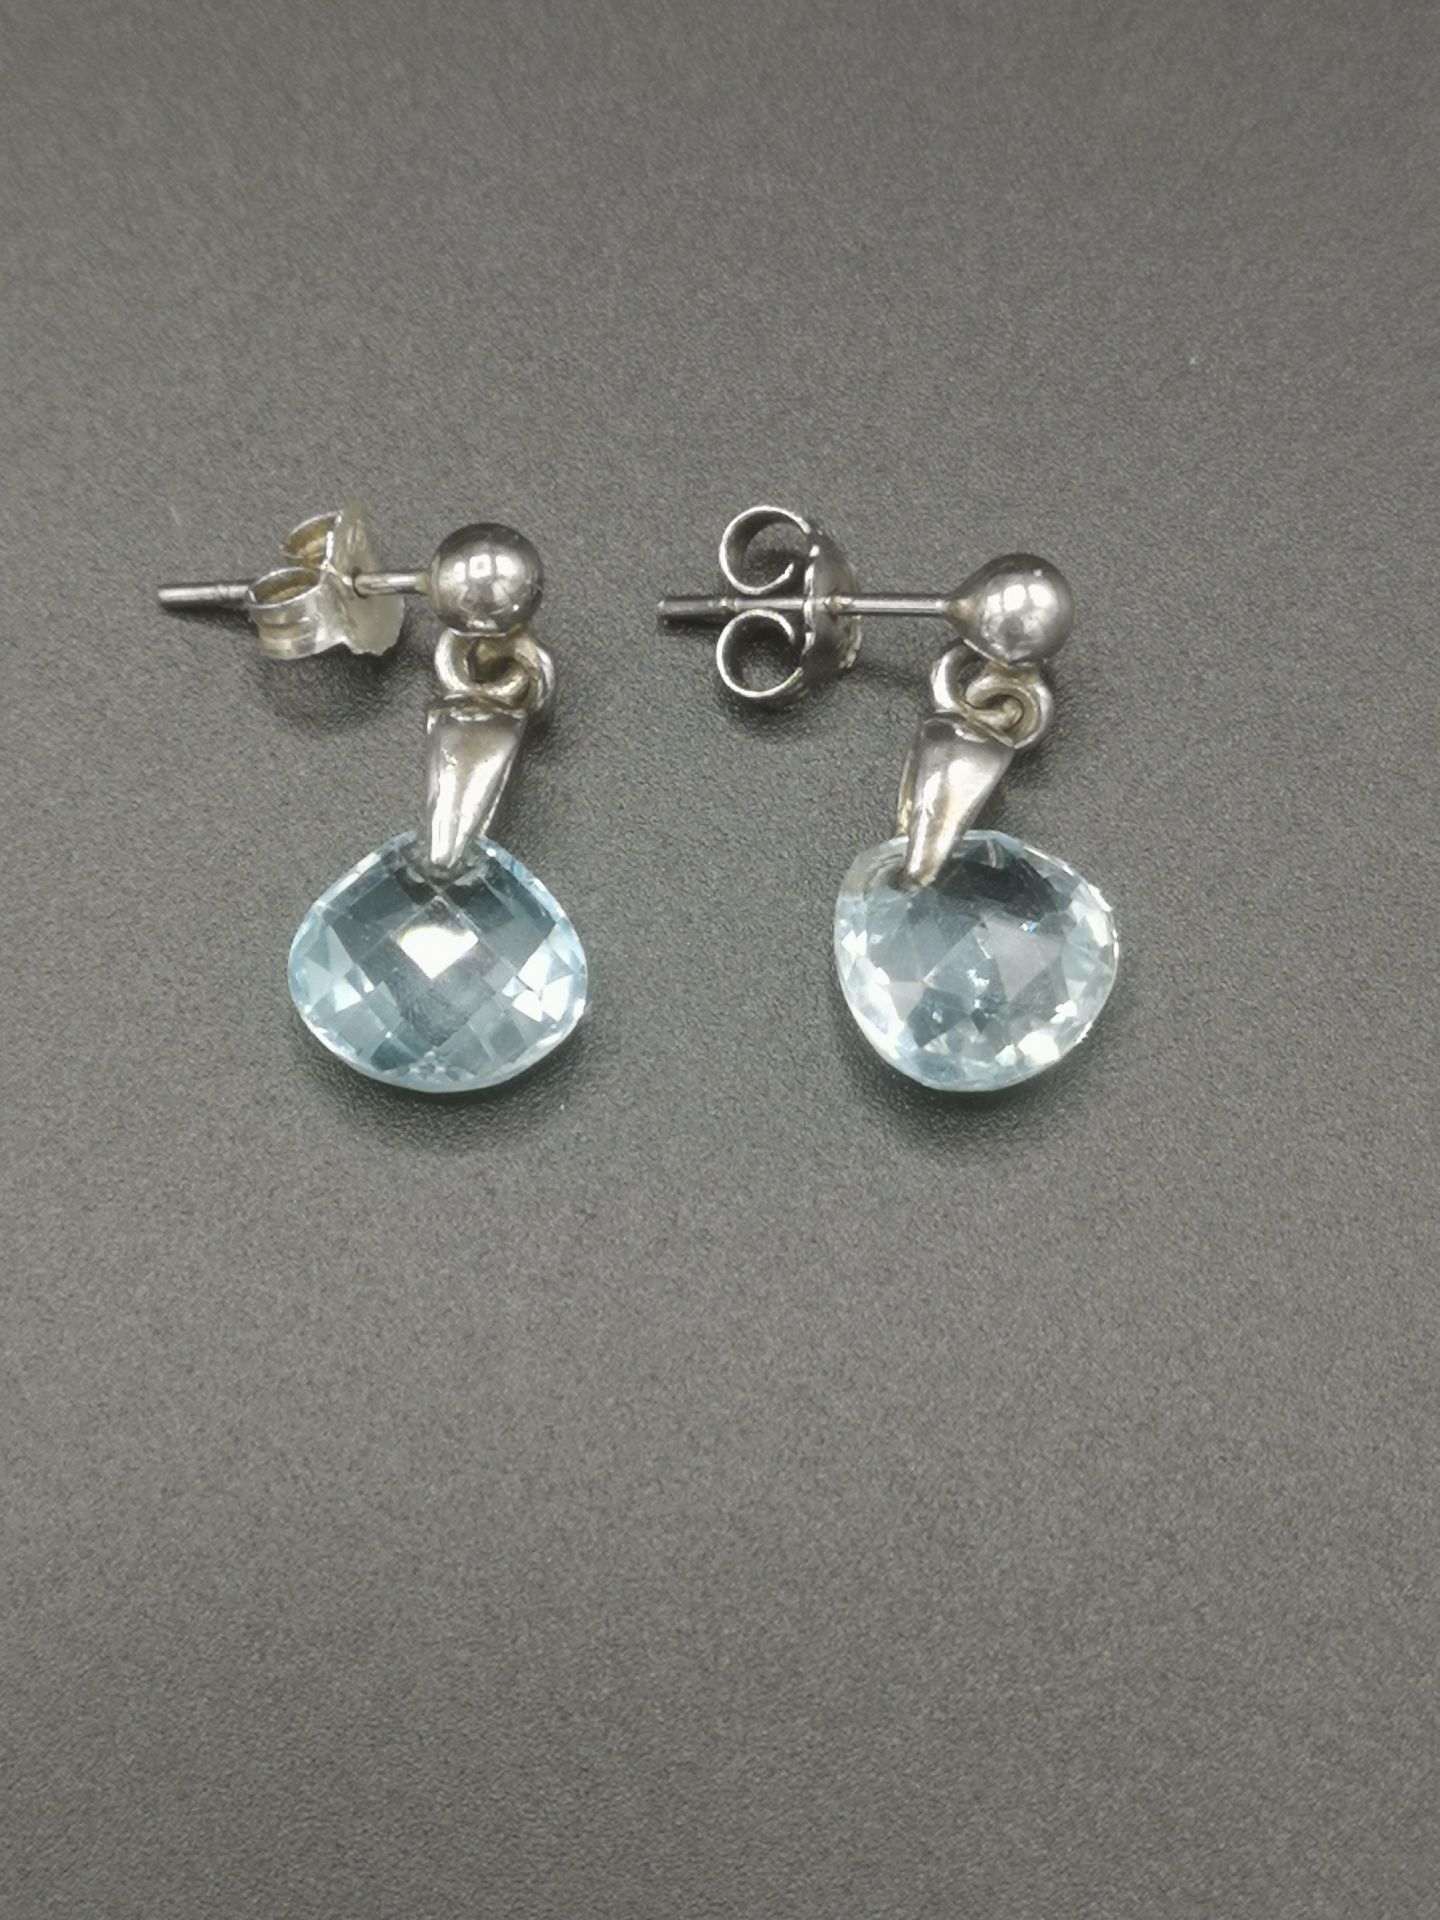 Pair of silver and topaz earrings - Image 2 of 4